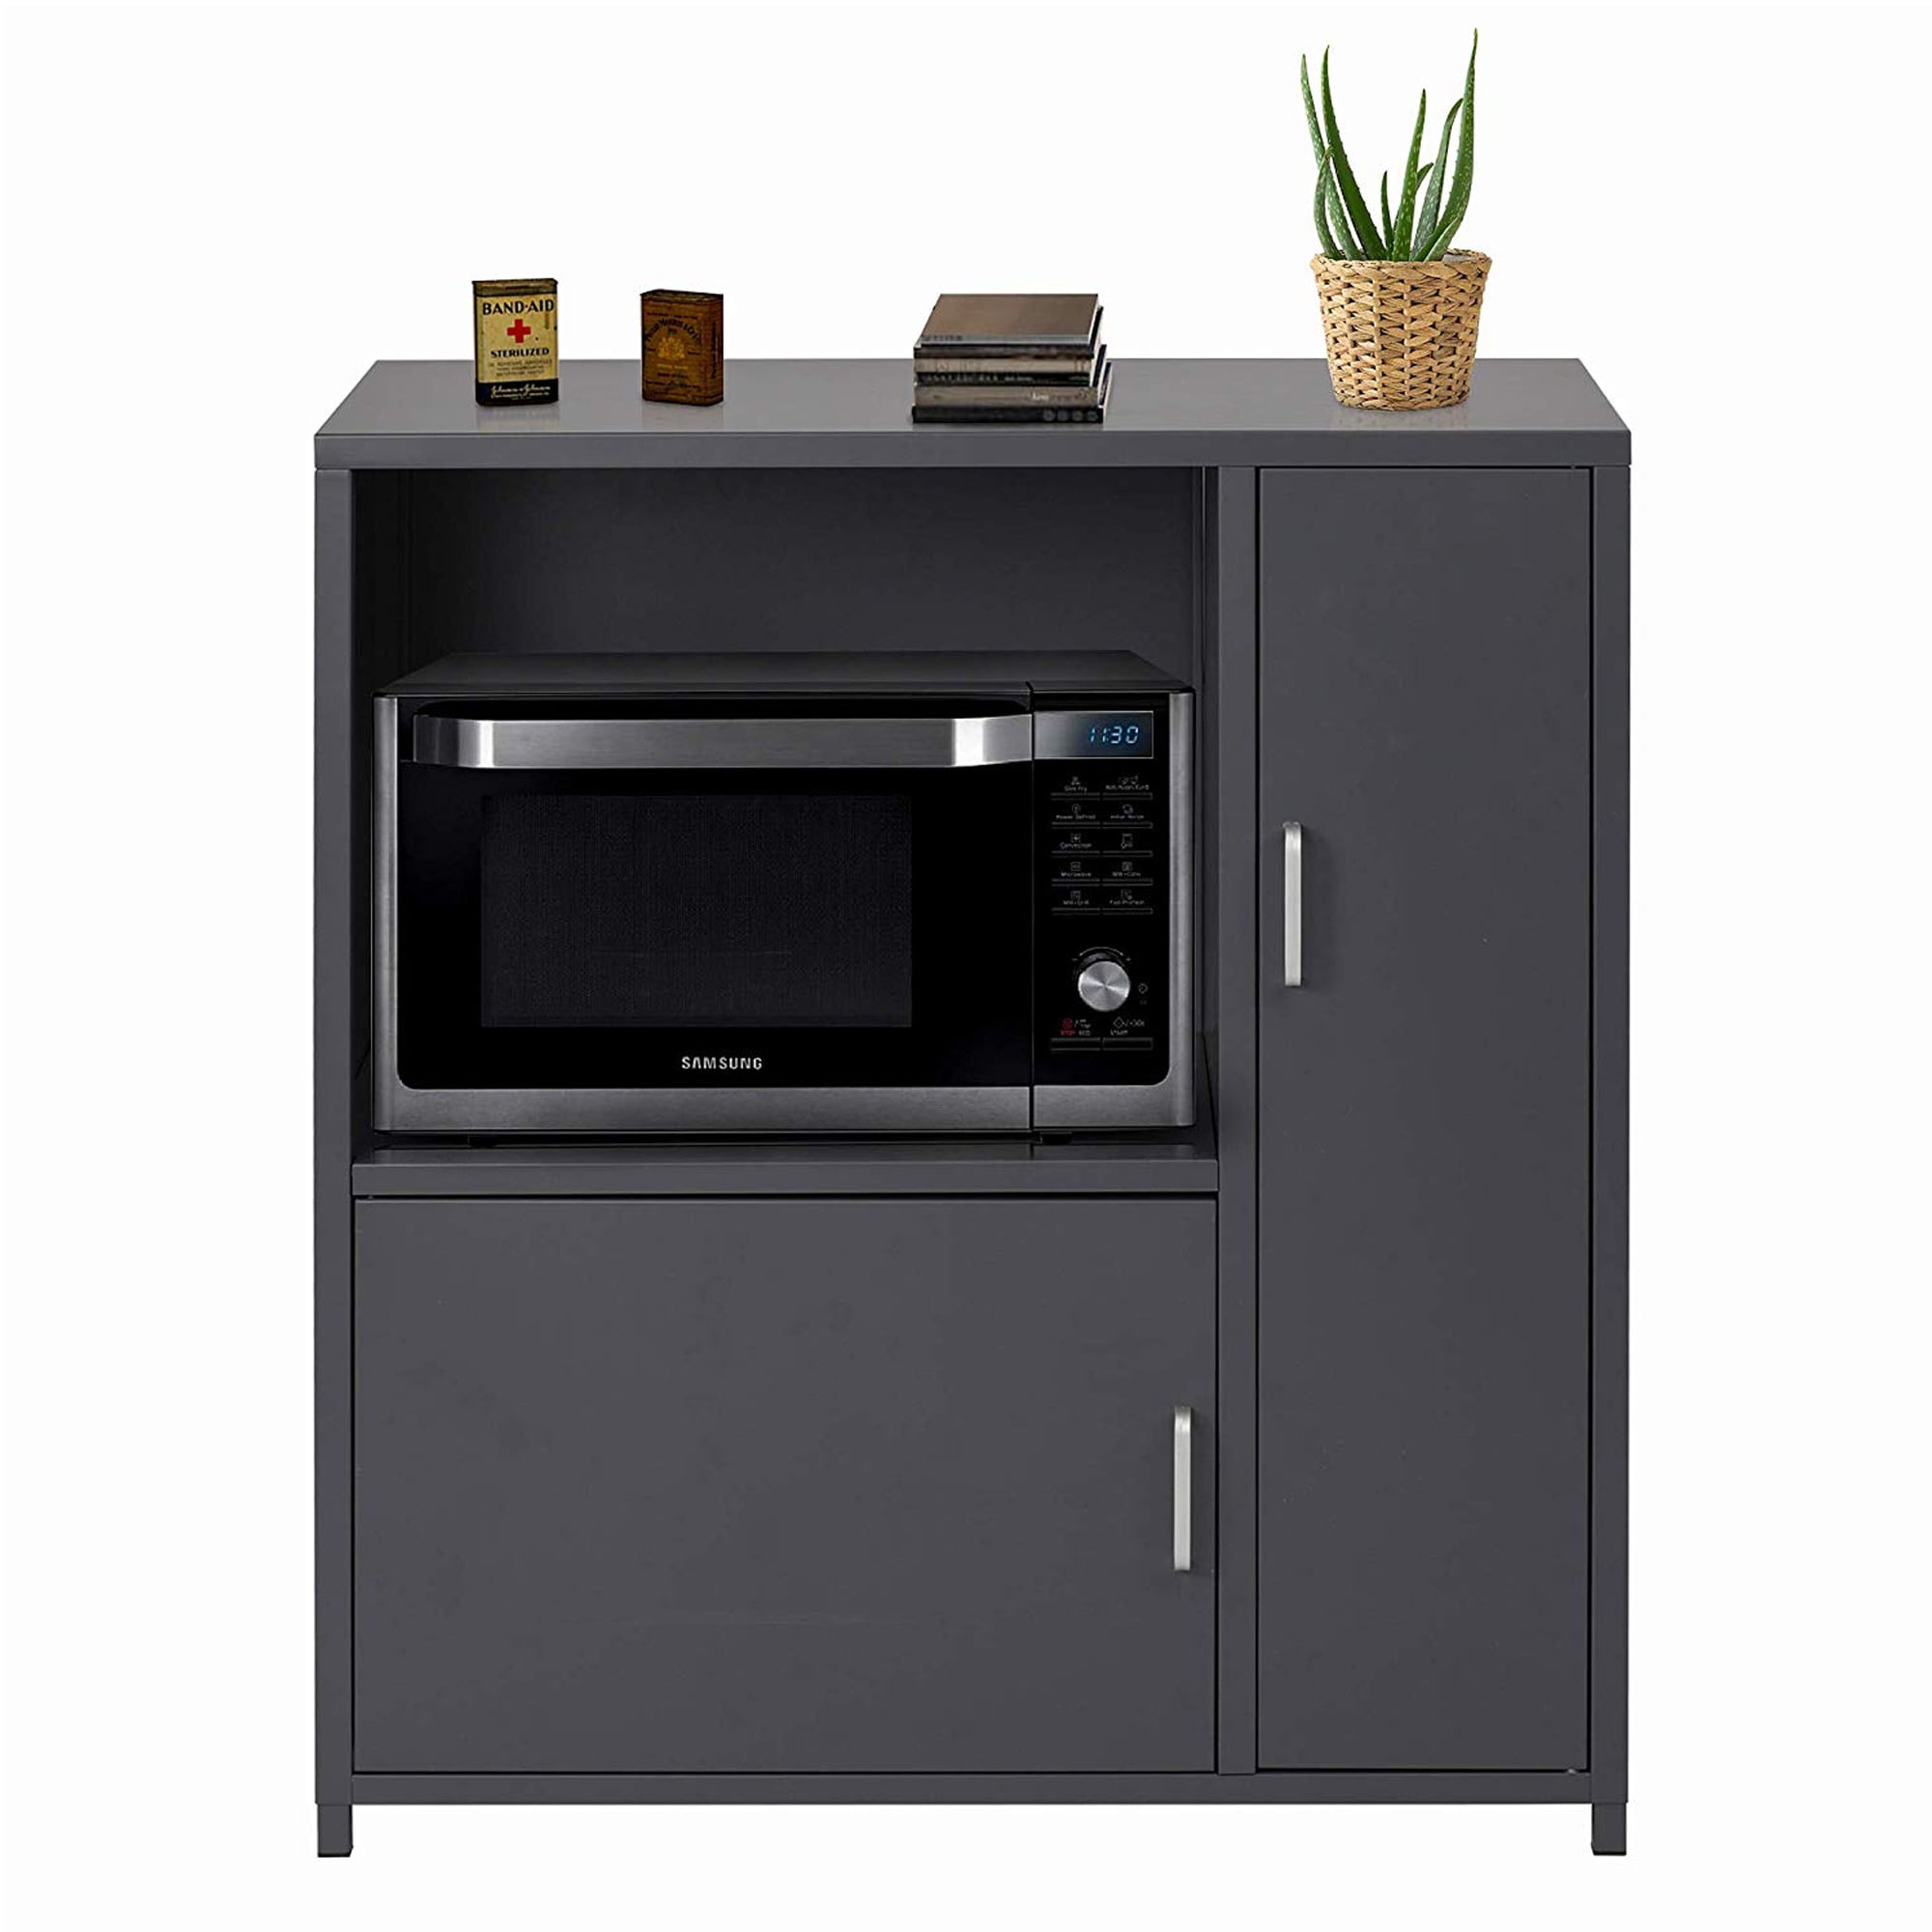 KARMAS PRODUCT Microwave Cabinet Stainless Steel Kitchen Storage